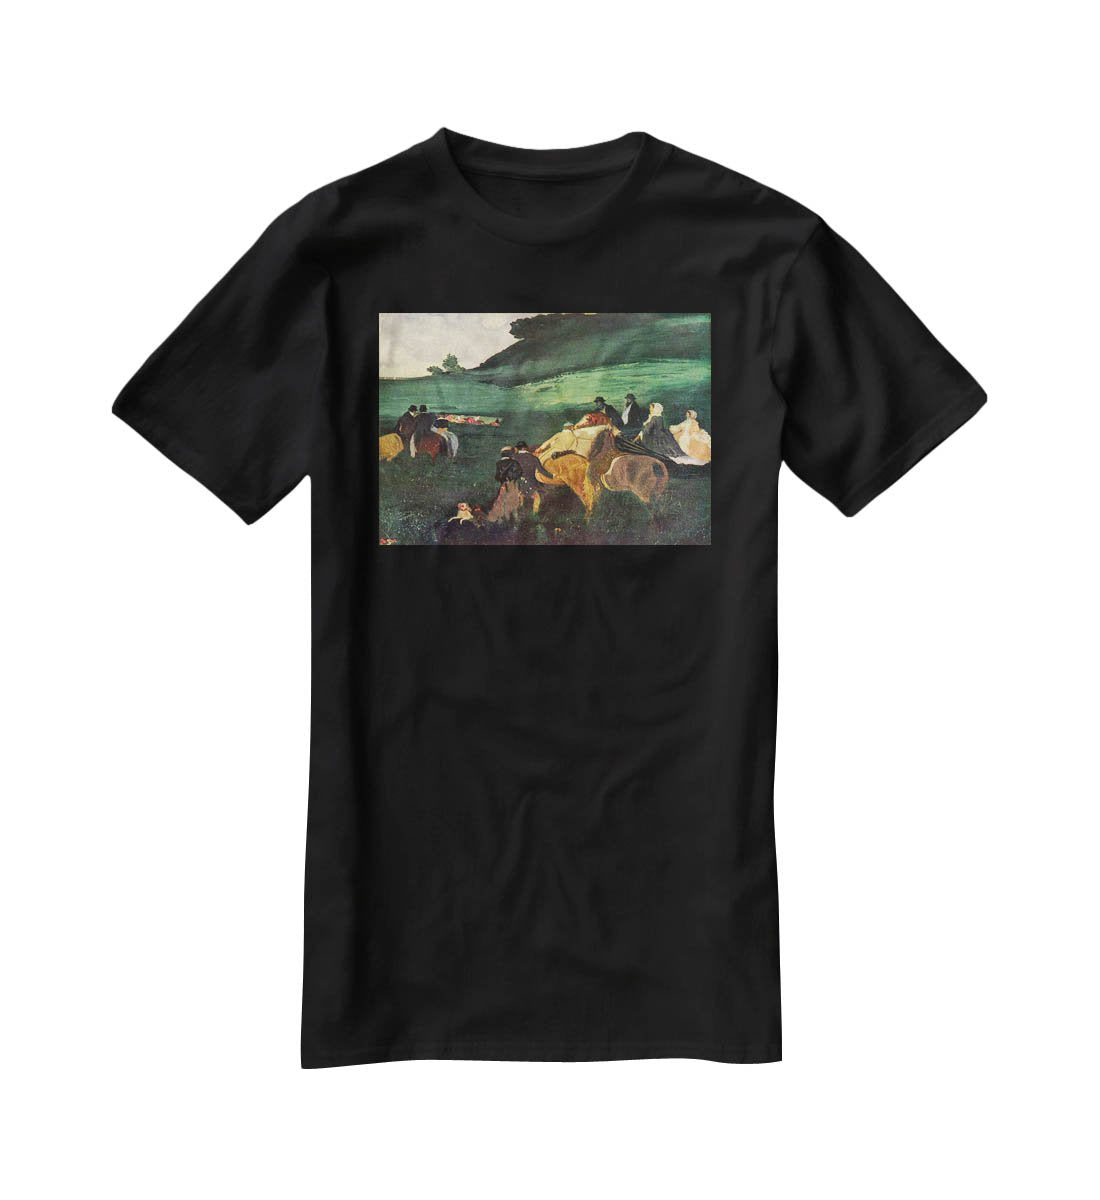 Riders in the landscape by Degas T-Shirt - Canvas Art Rocks - 1